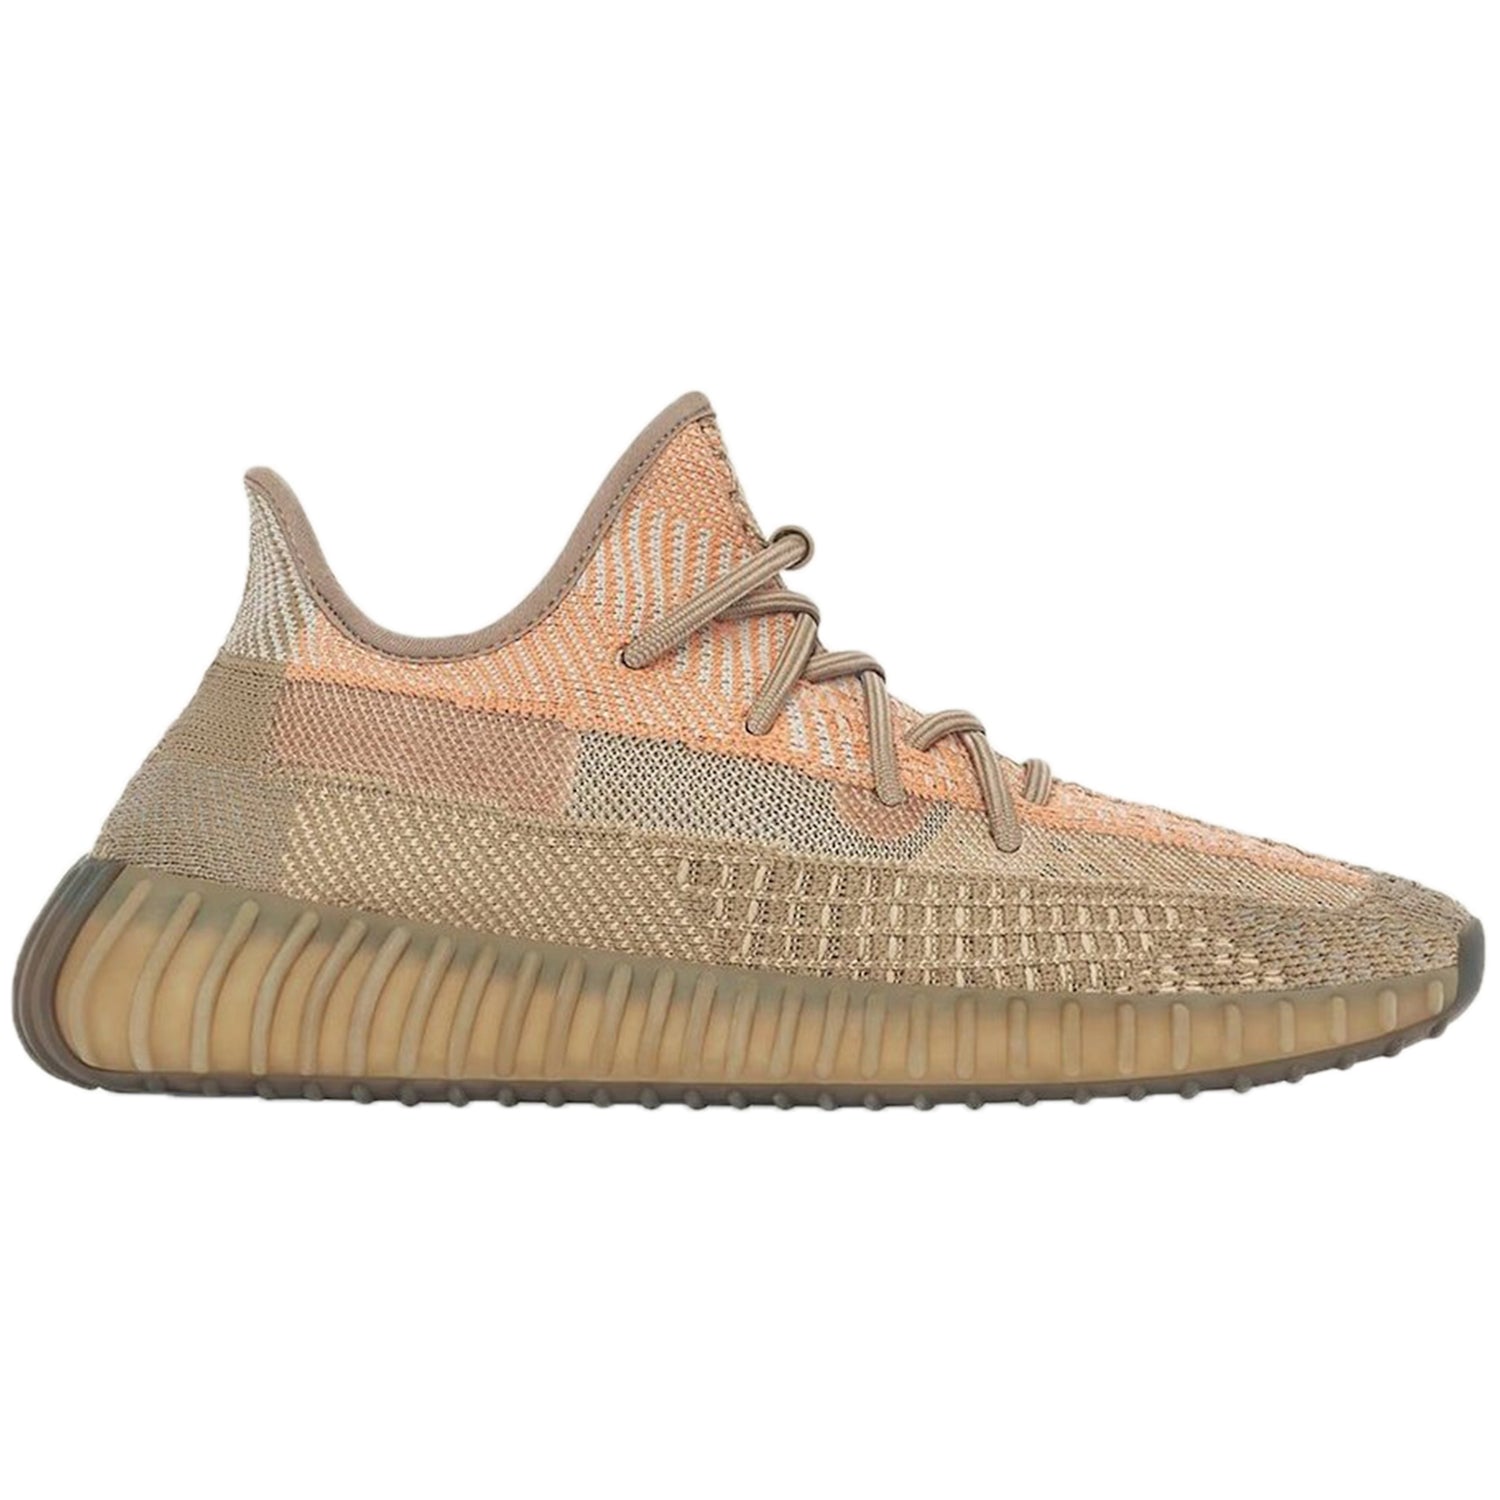 adidas Yeezy Boost 350 V2 Sand Taupe